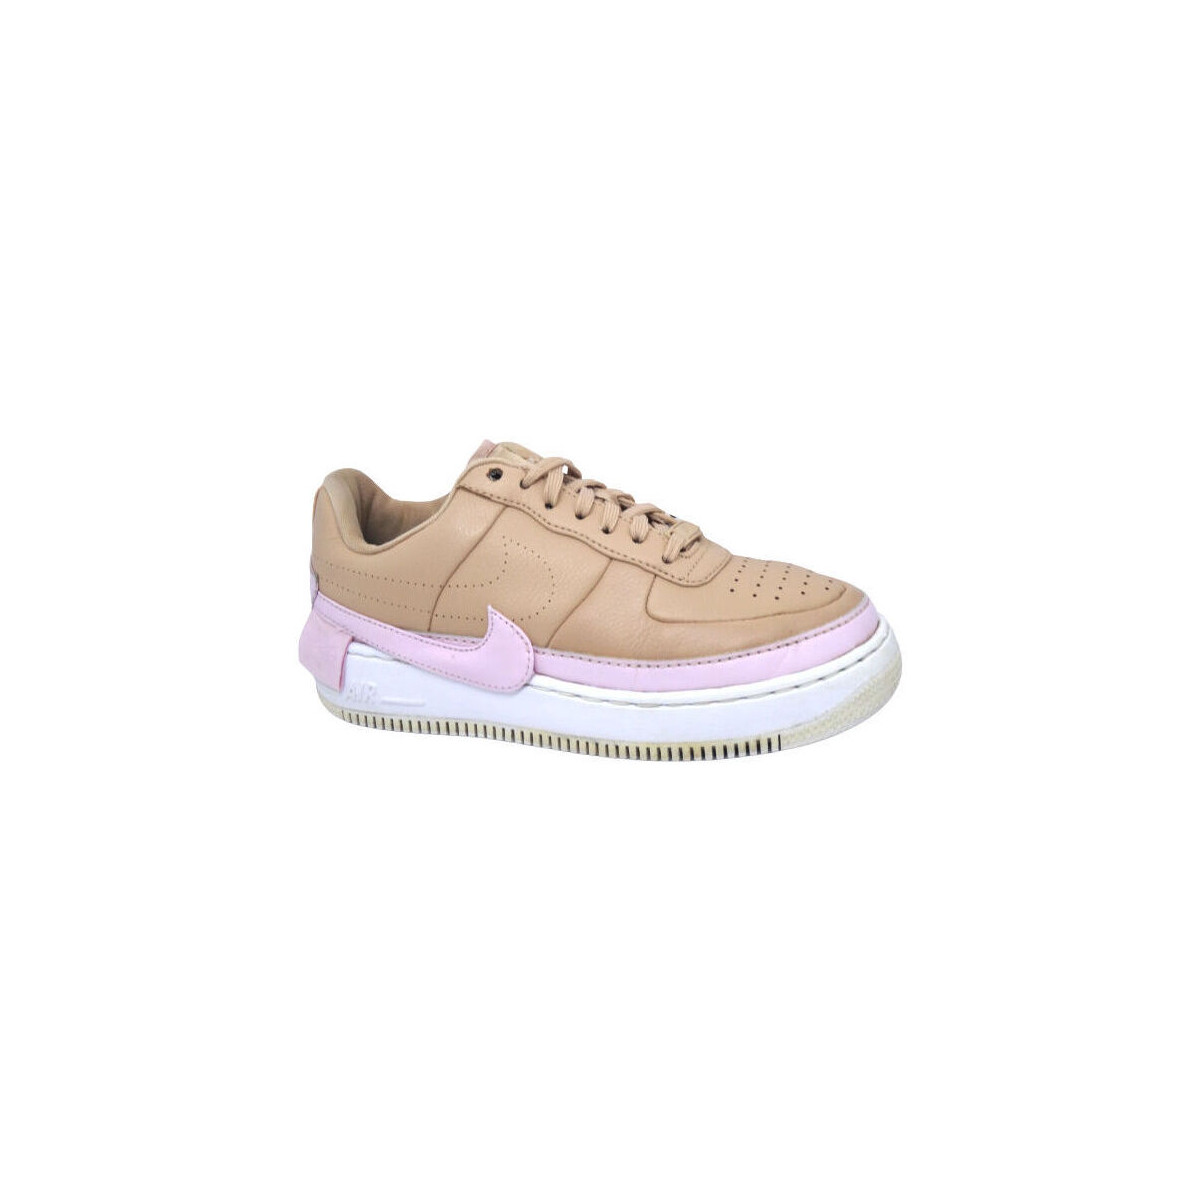 Chaussures Baskets mode Nike lunarglide Reconditionné Air Force 1 - Beige